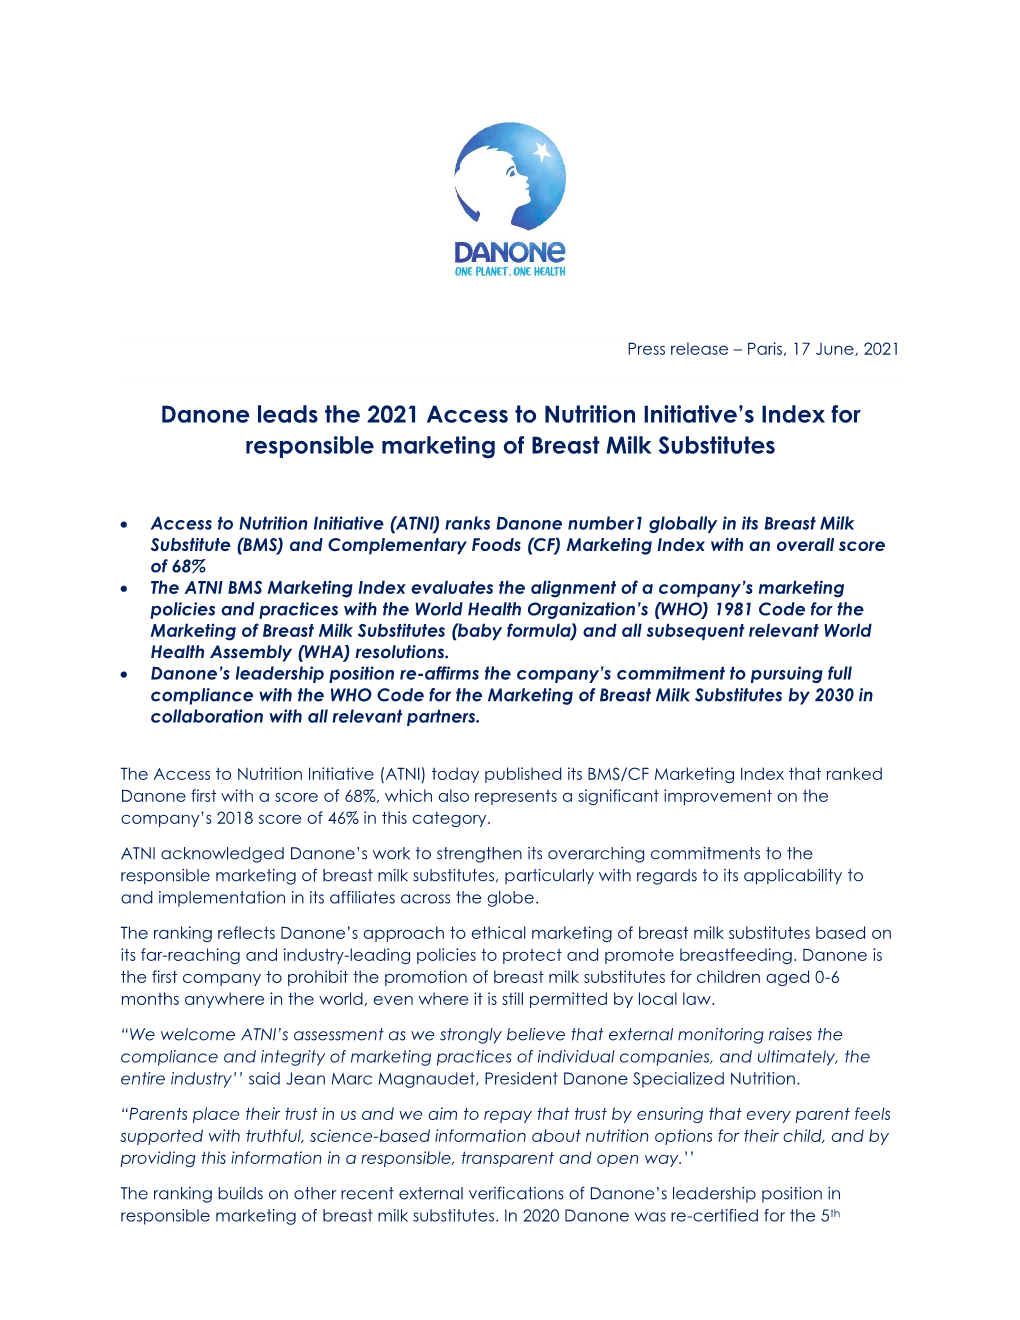 Danone Leads the 2021 Access to Nutrition Initiative's Index For